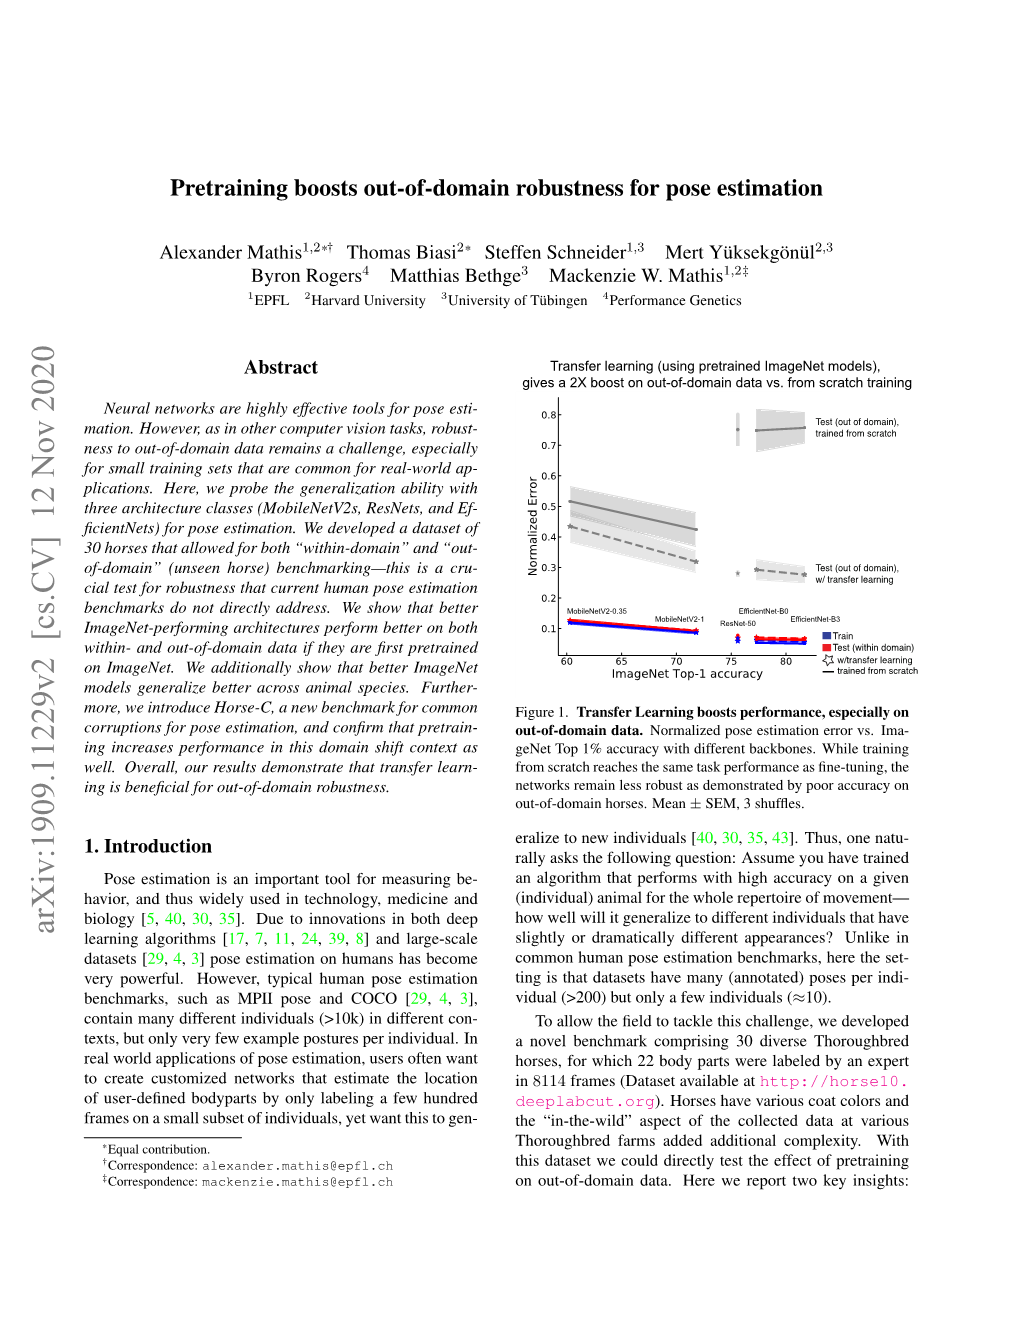 Pretraining Boosts Out-Of-Domain Robustness for Pose Estimation